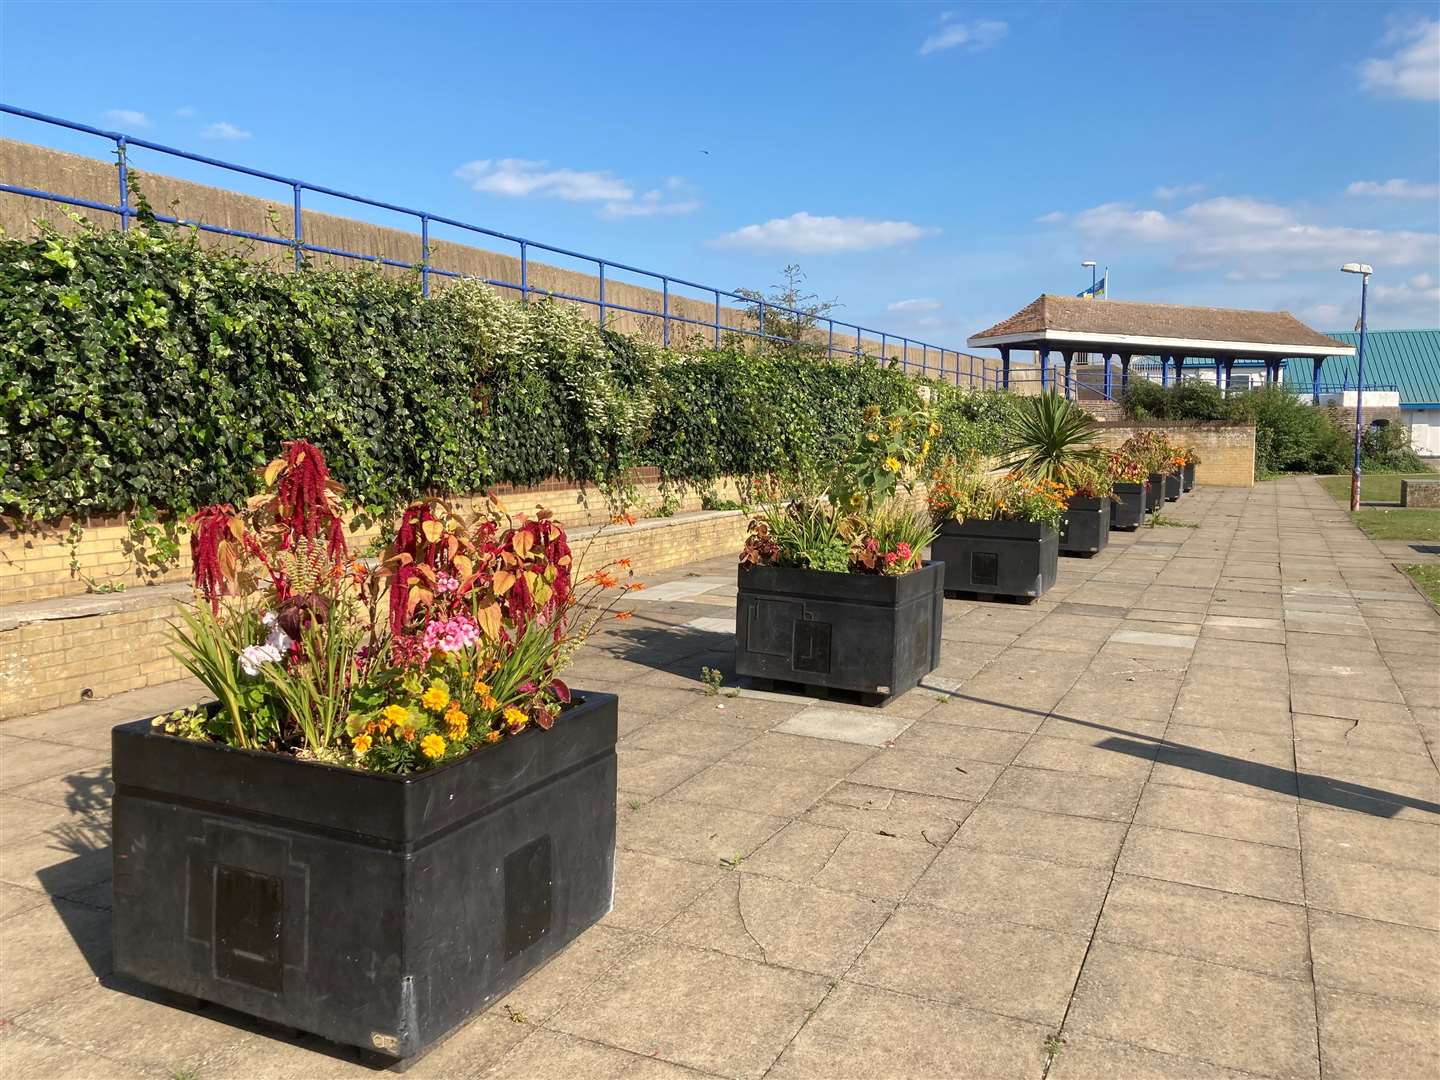 The new-look Beachfiels seafront park at Sheerness is bursting into colour with the recent planting of bee-friendly plants in the flower beds